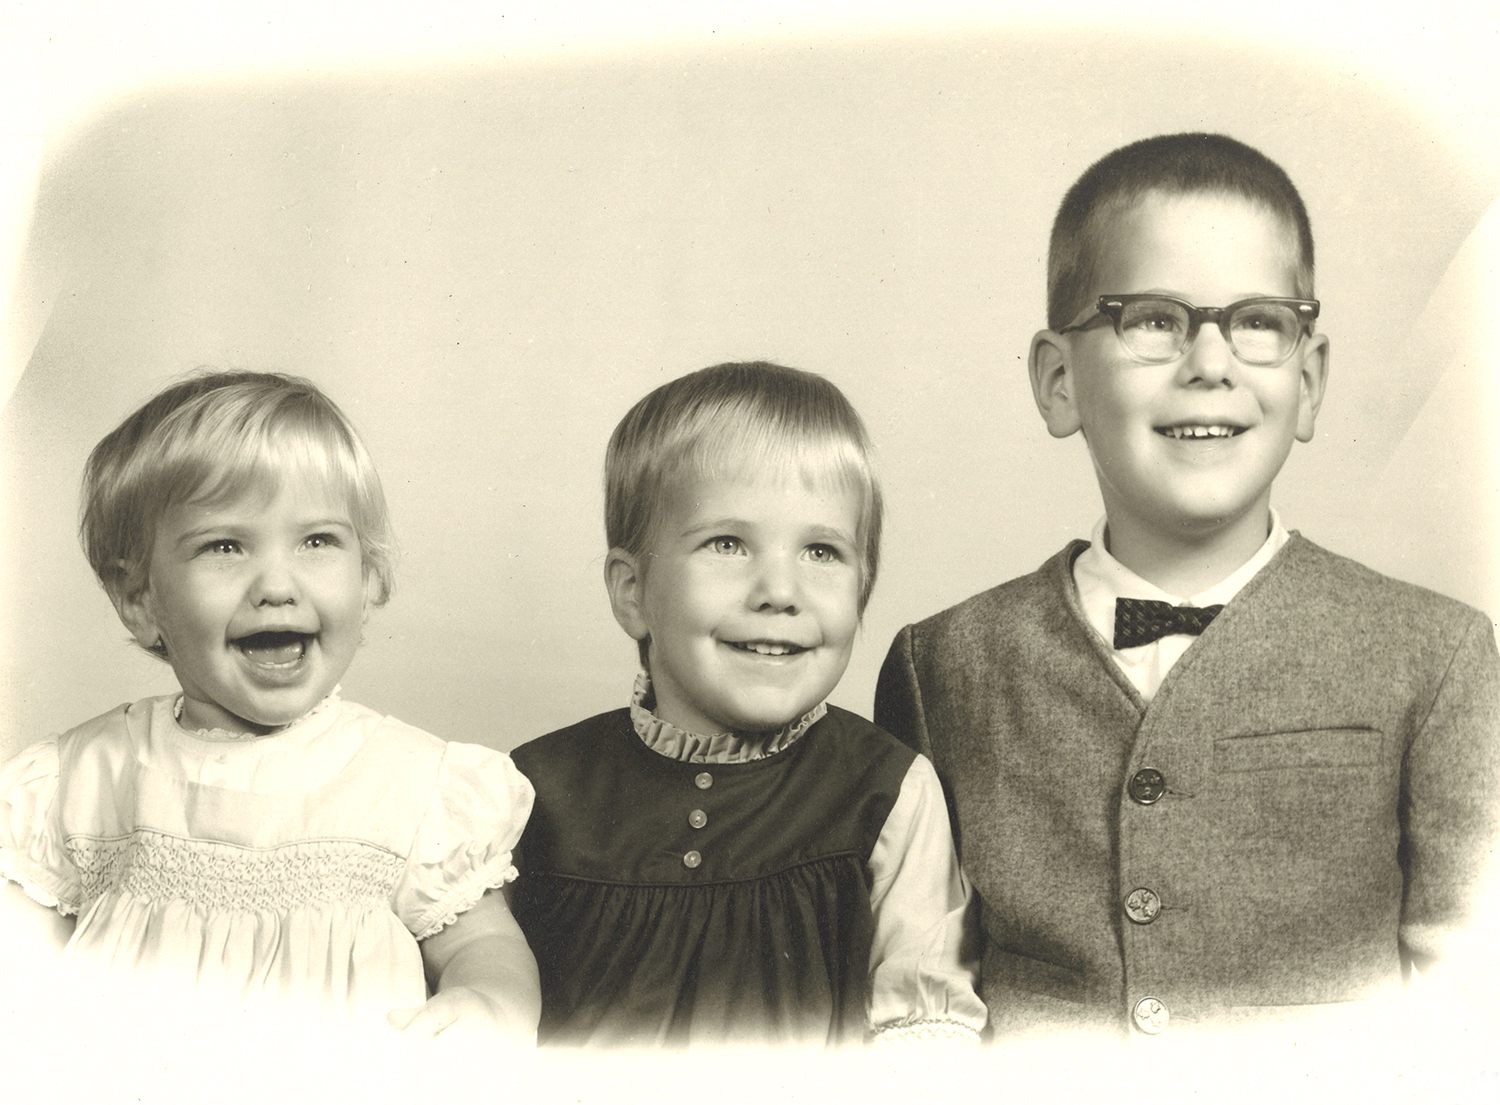 Advances in recognizing inherited diseases like galactosemia allowed Christine Winey (on left) to grow up happy and healthy with her siblings Karen, in the middle, and Mark, on the right. Courtesy photo